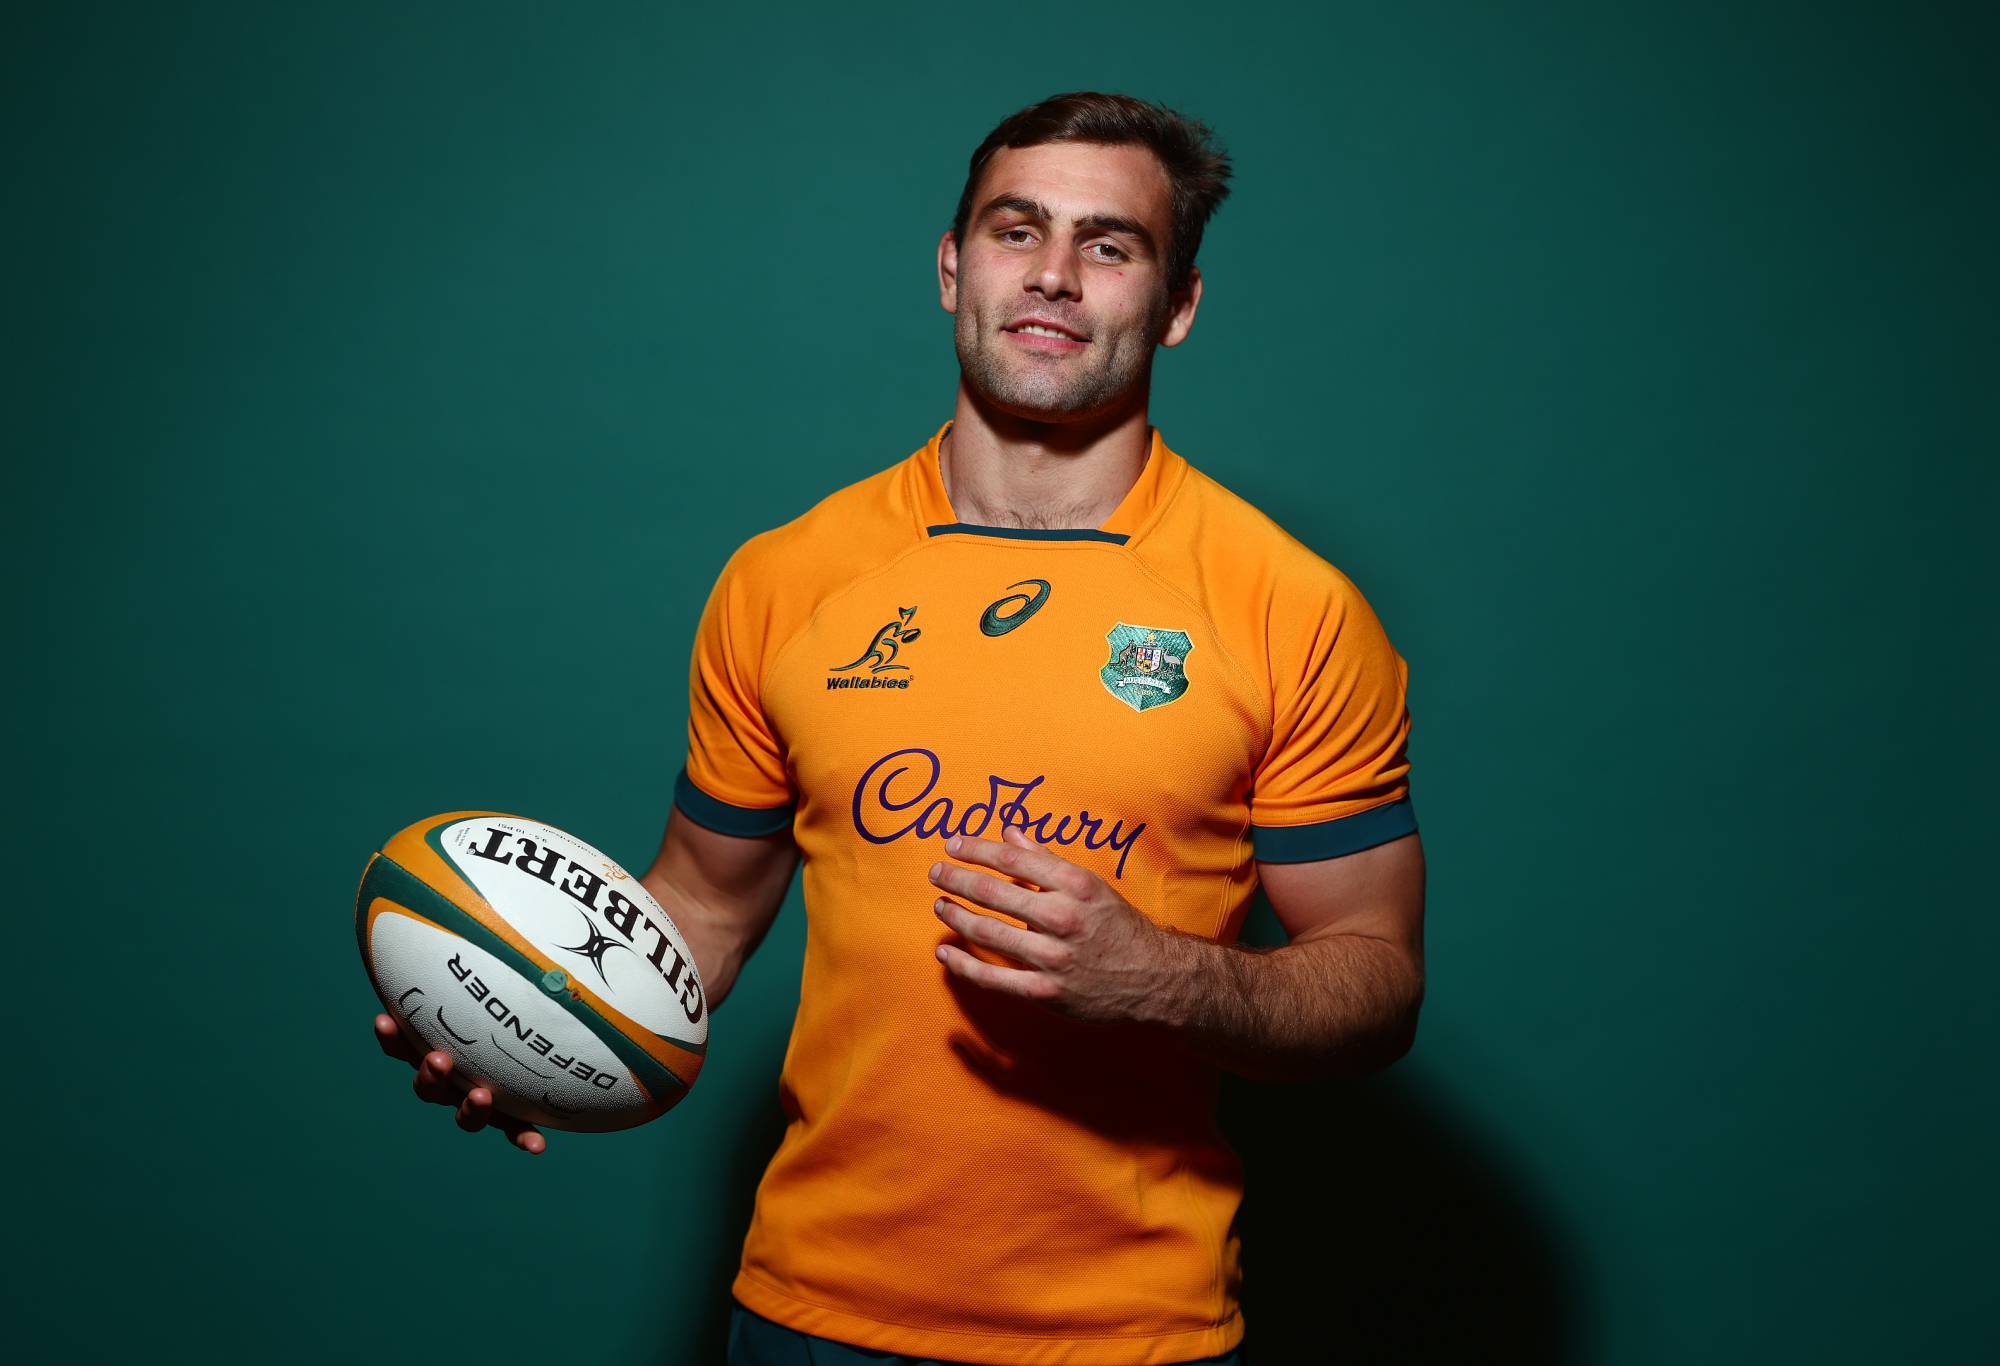 Josh Kemeny poses during a Wallabies Rugby Championship Headshots Session at Sanctuary Cove on June 26, 2023 in Gold Coast, Australia. (Photo by Chris Hyde/Getty Images)